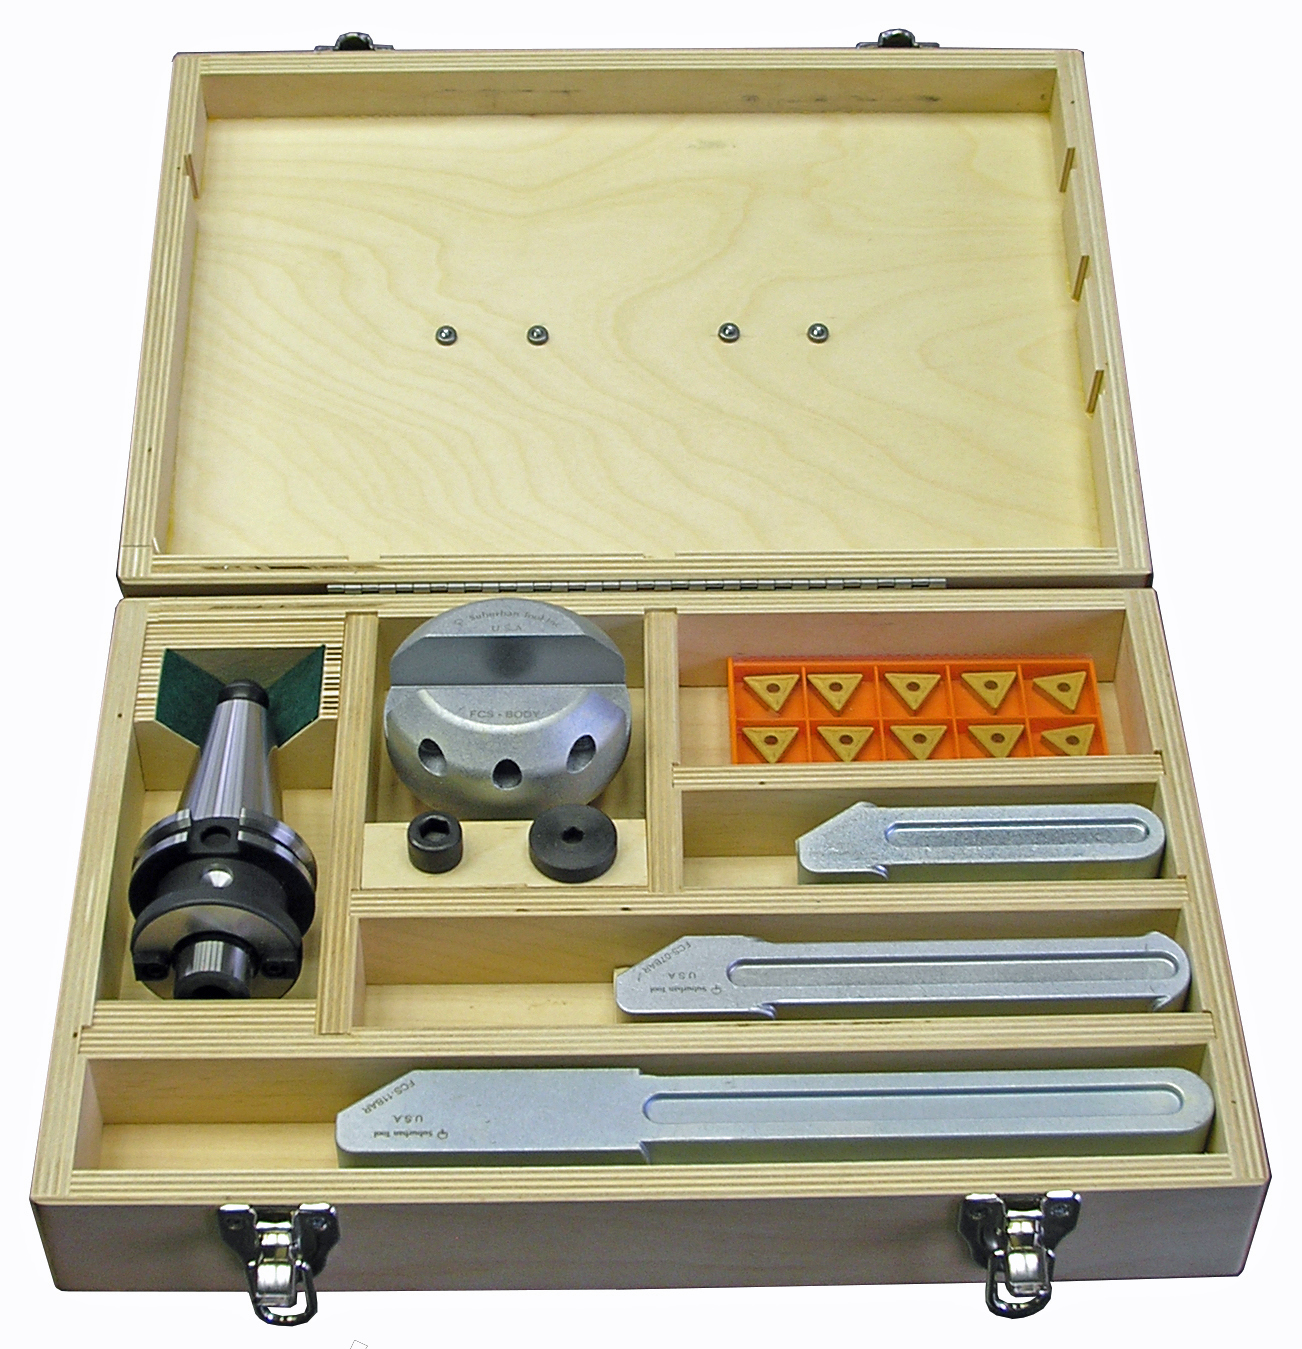 FLY CUTTER SETS from Suburban Tool, Inc.